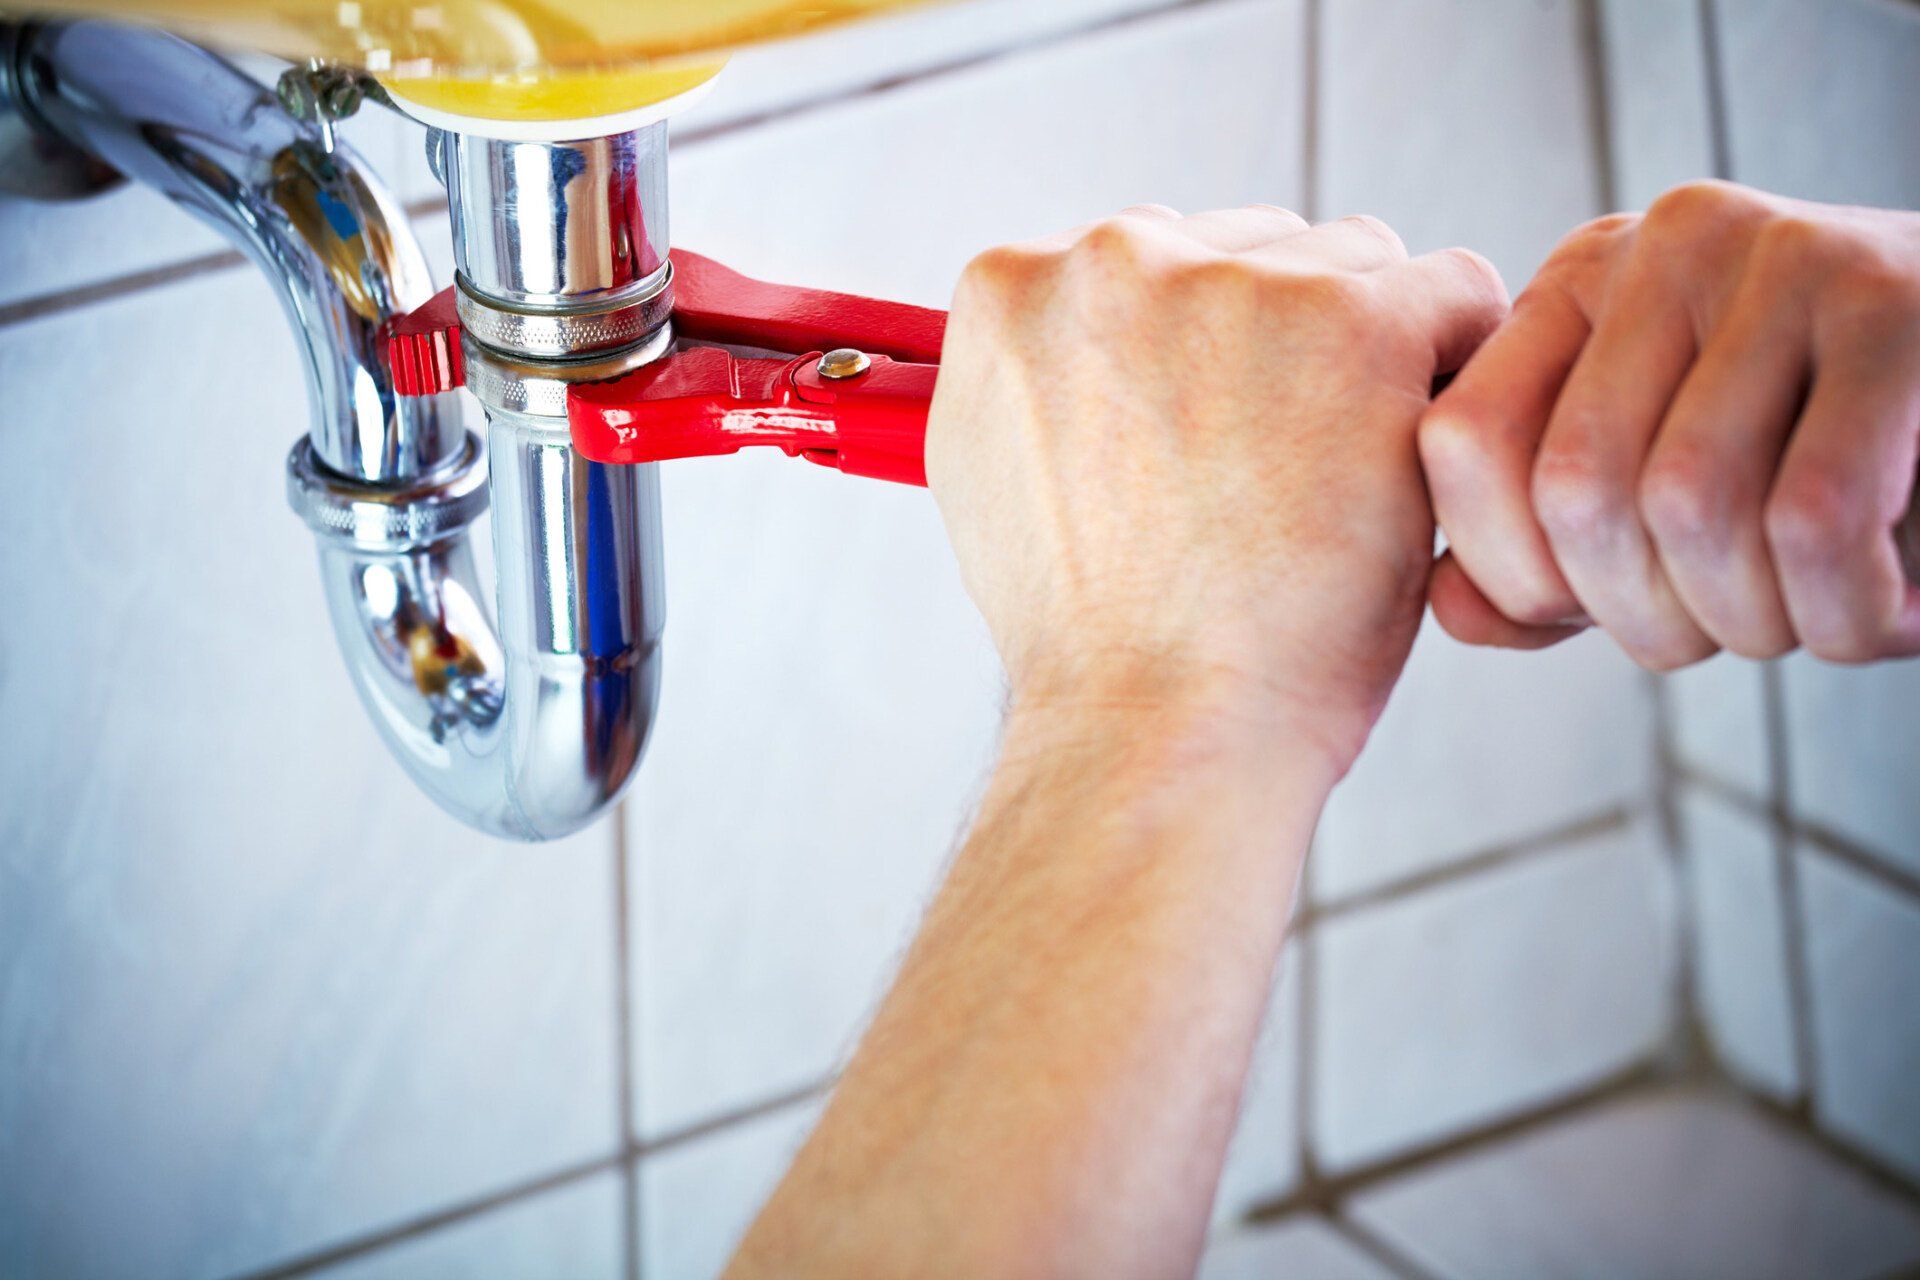 Plumber Hands Holding Wrench And Fixing A Sink In Bathroom - Warren, MI - Maple Lane Pest Control